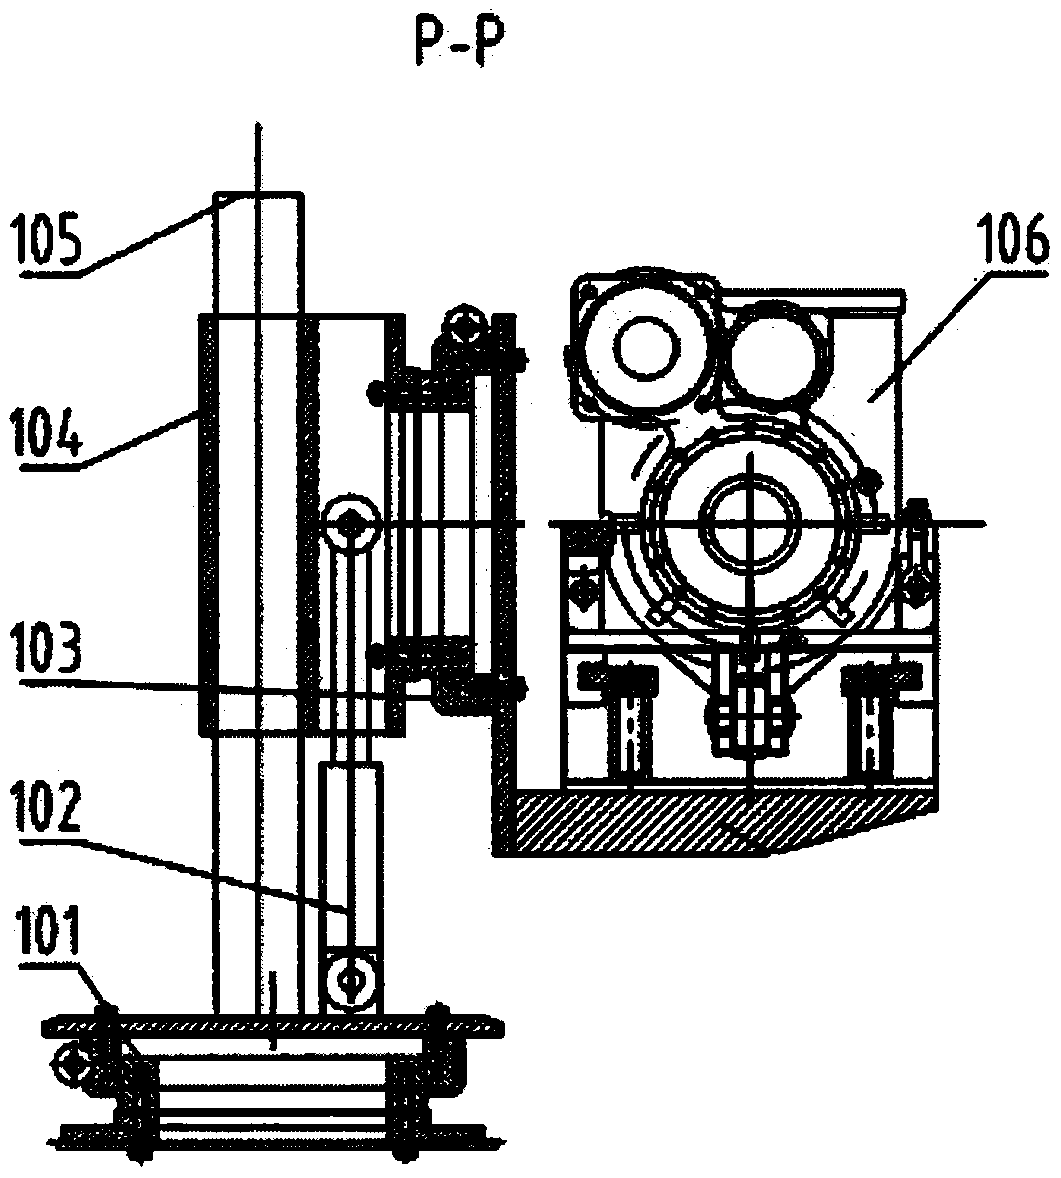 Four-linkage lifting omni-directional rotation device